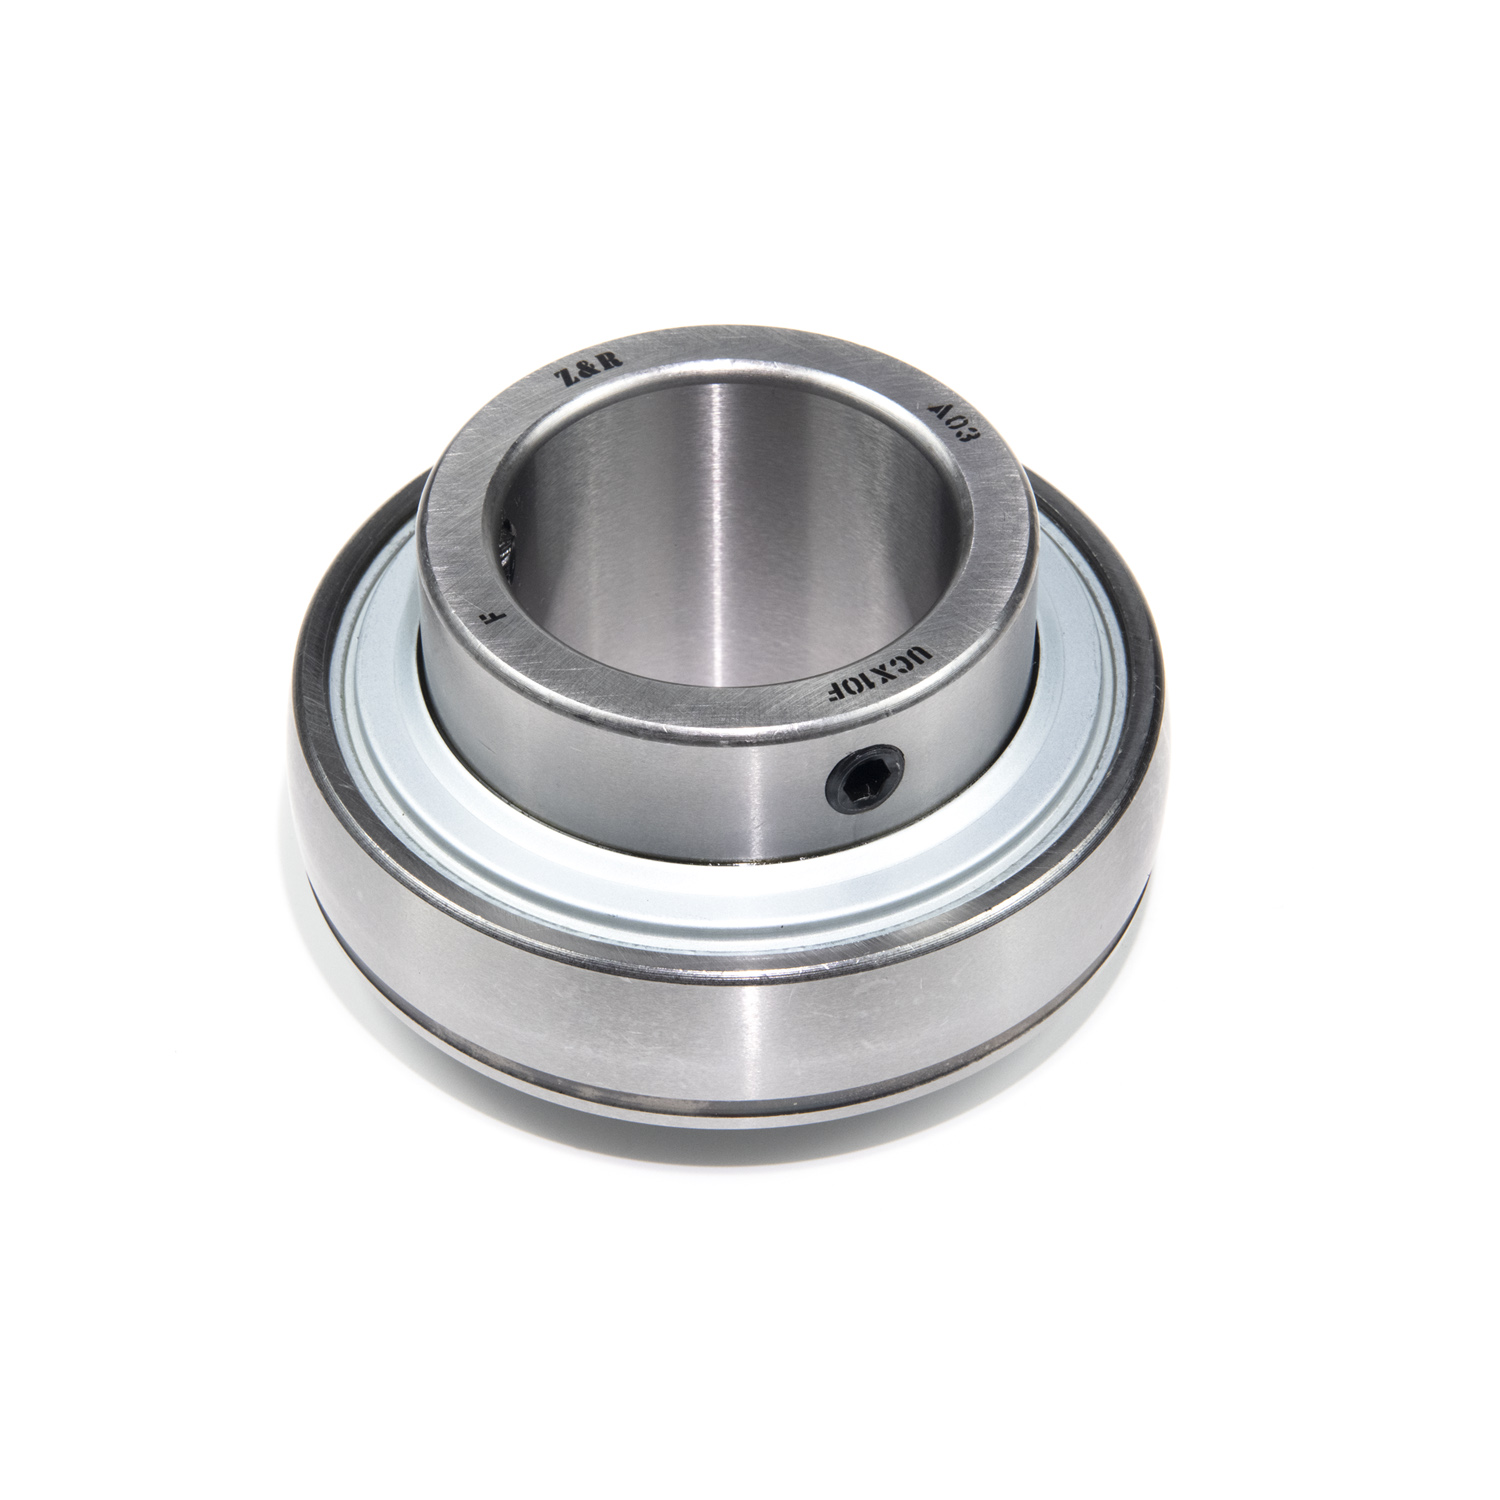 Advantages of high temperature resistant outer spherical bearings